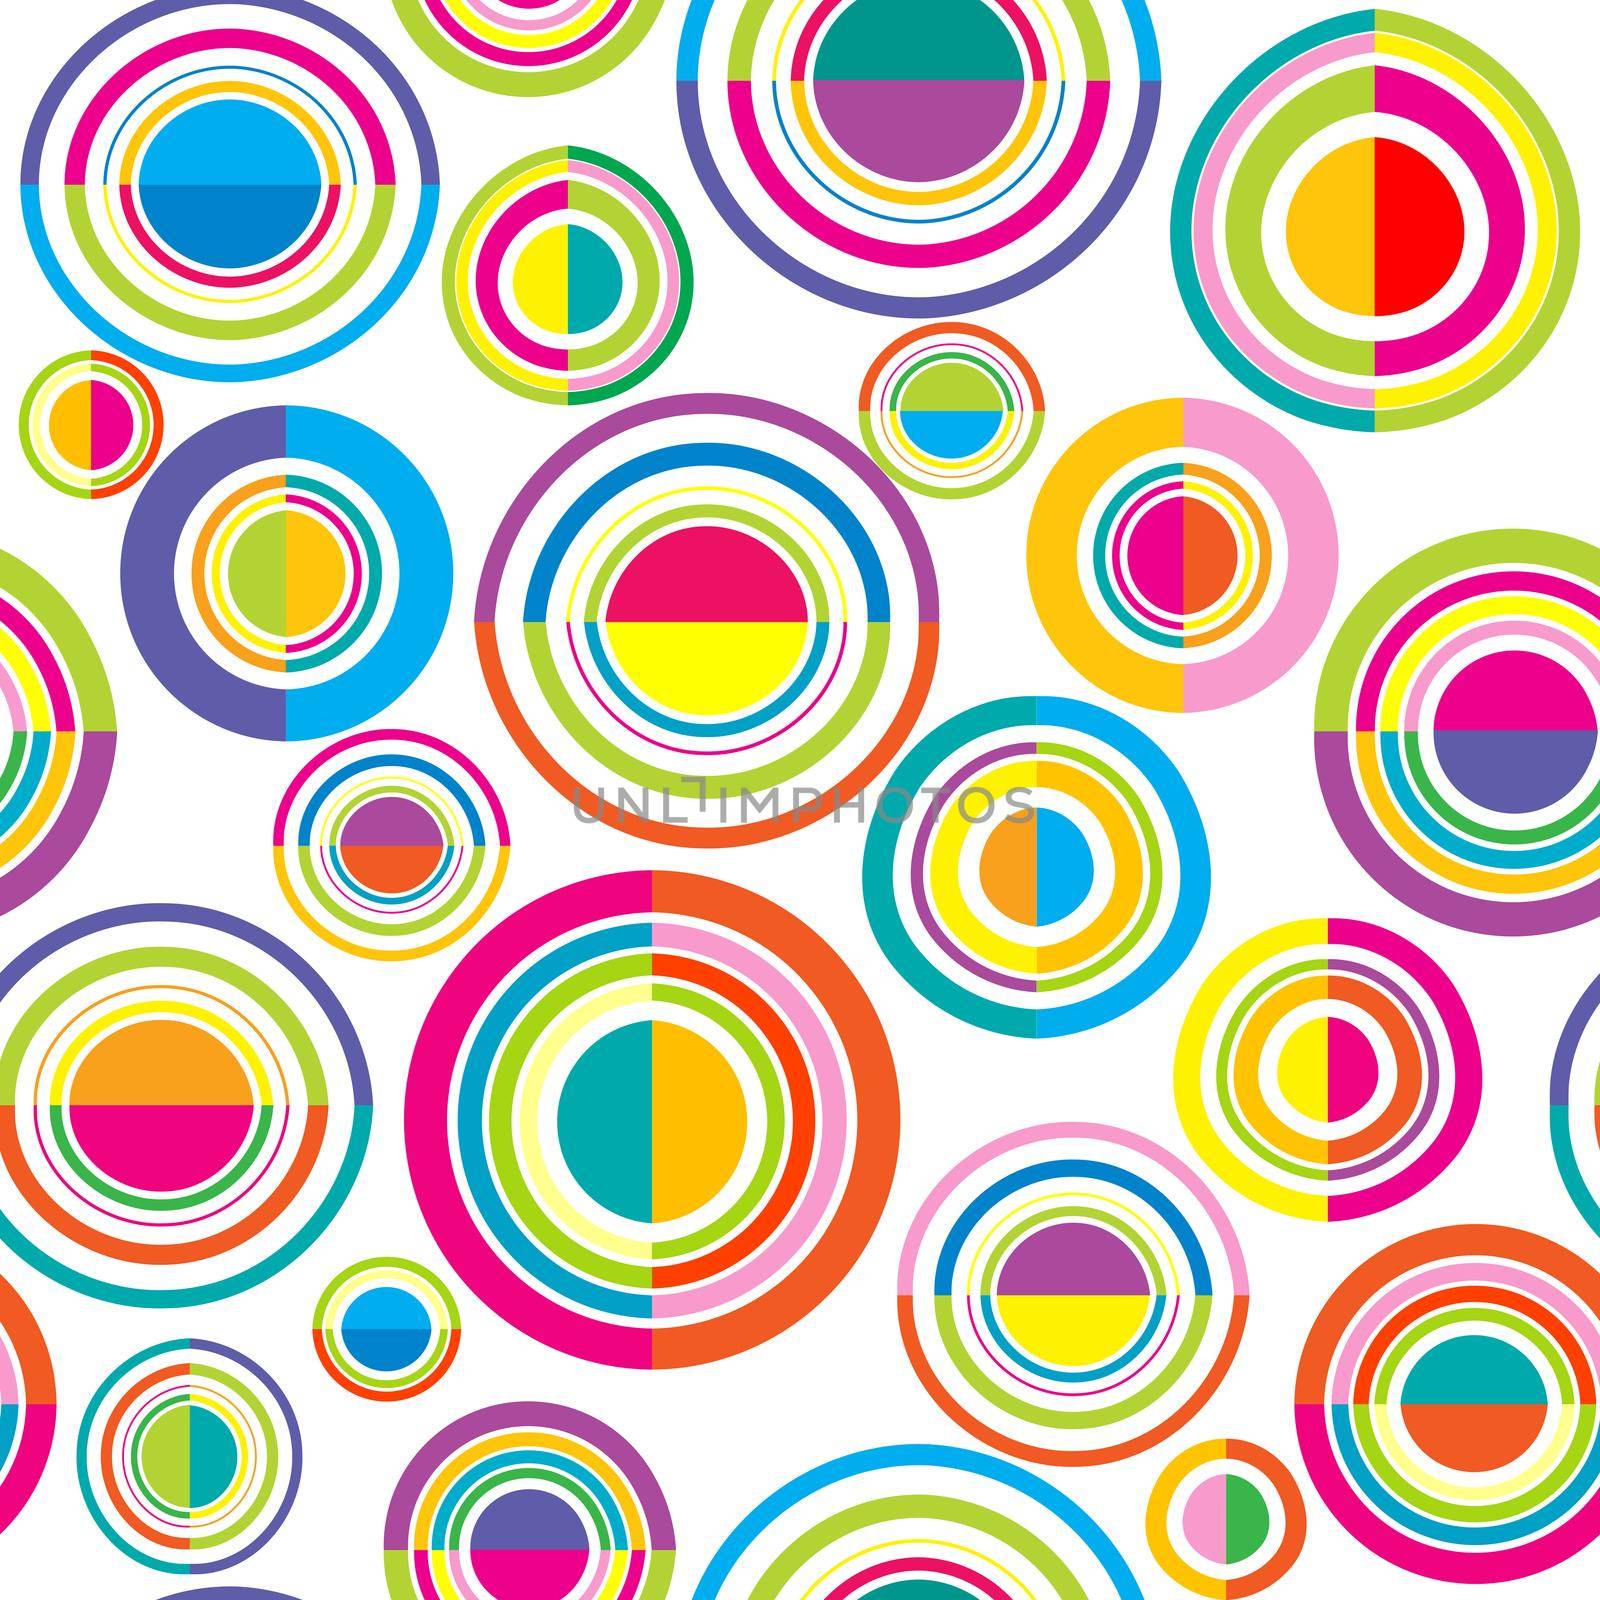 Colorful seamless pattern with circles and round shapes by hibrida13